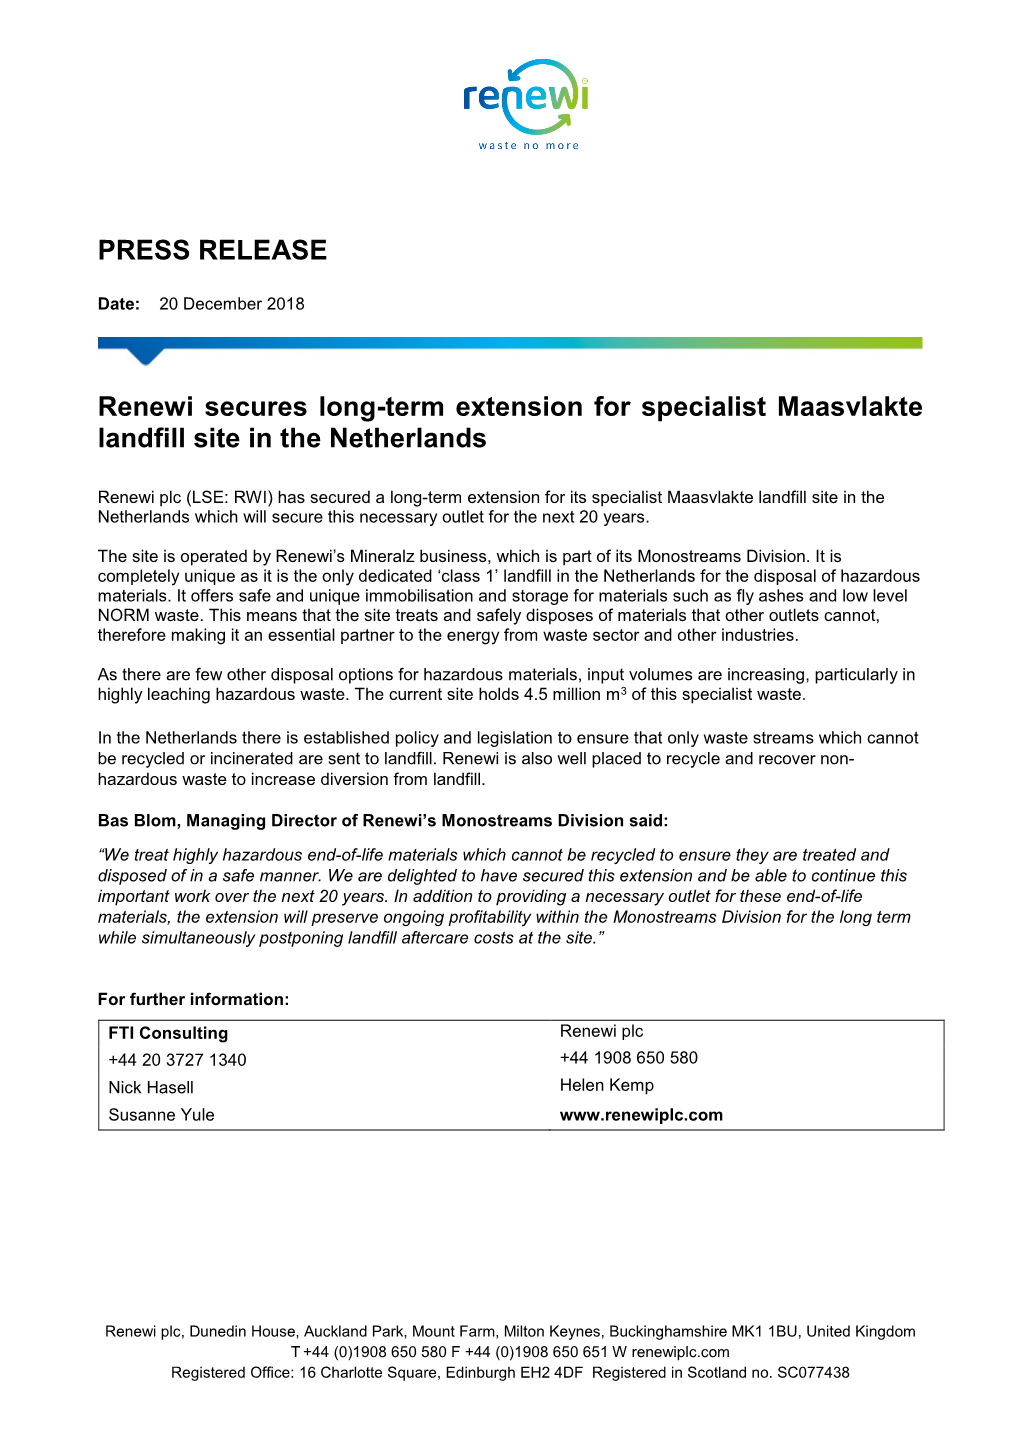 Renewi Secures Long-Term Extension for Specialist Maasvlakte Landfill Site in the Netherlands